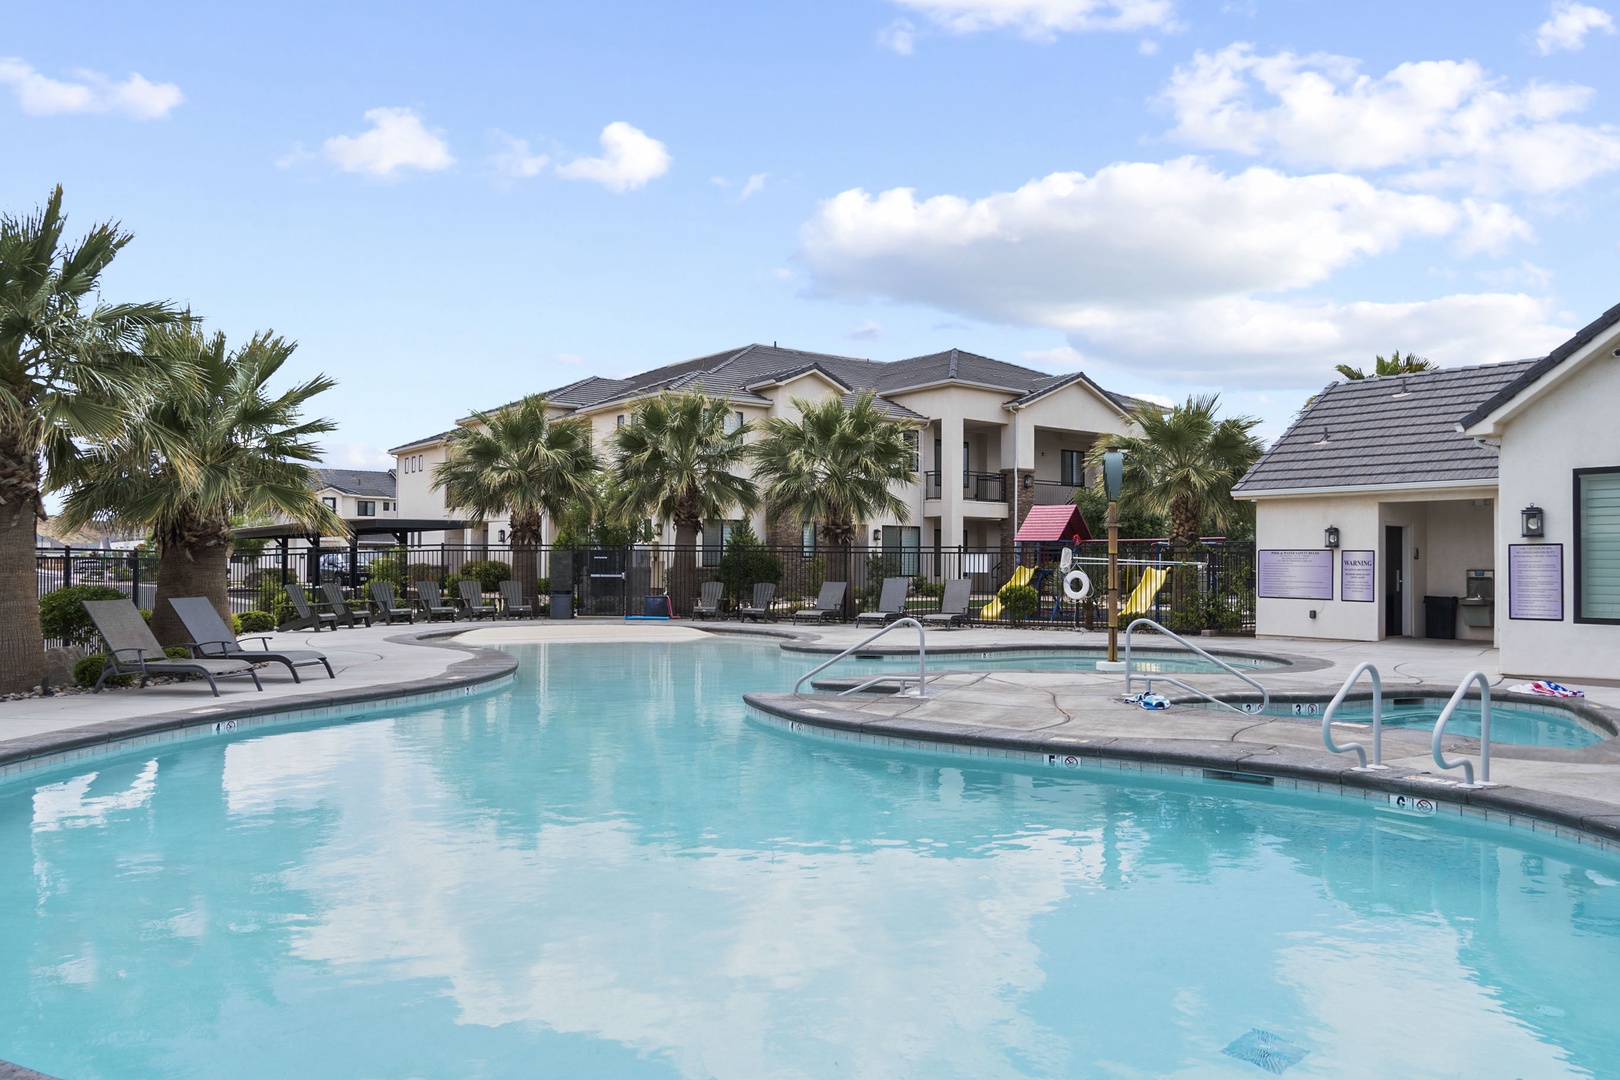 Make a splash or lounge by the sparkling community pool!